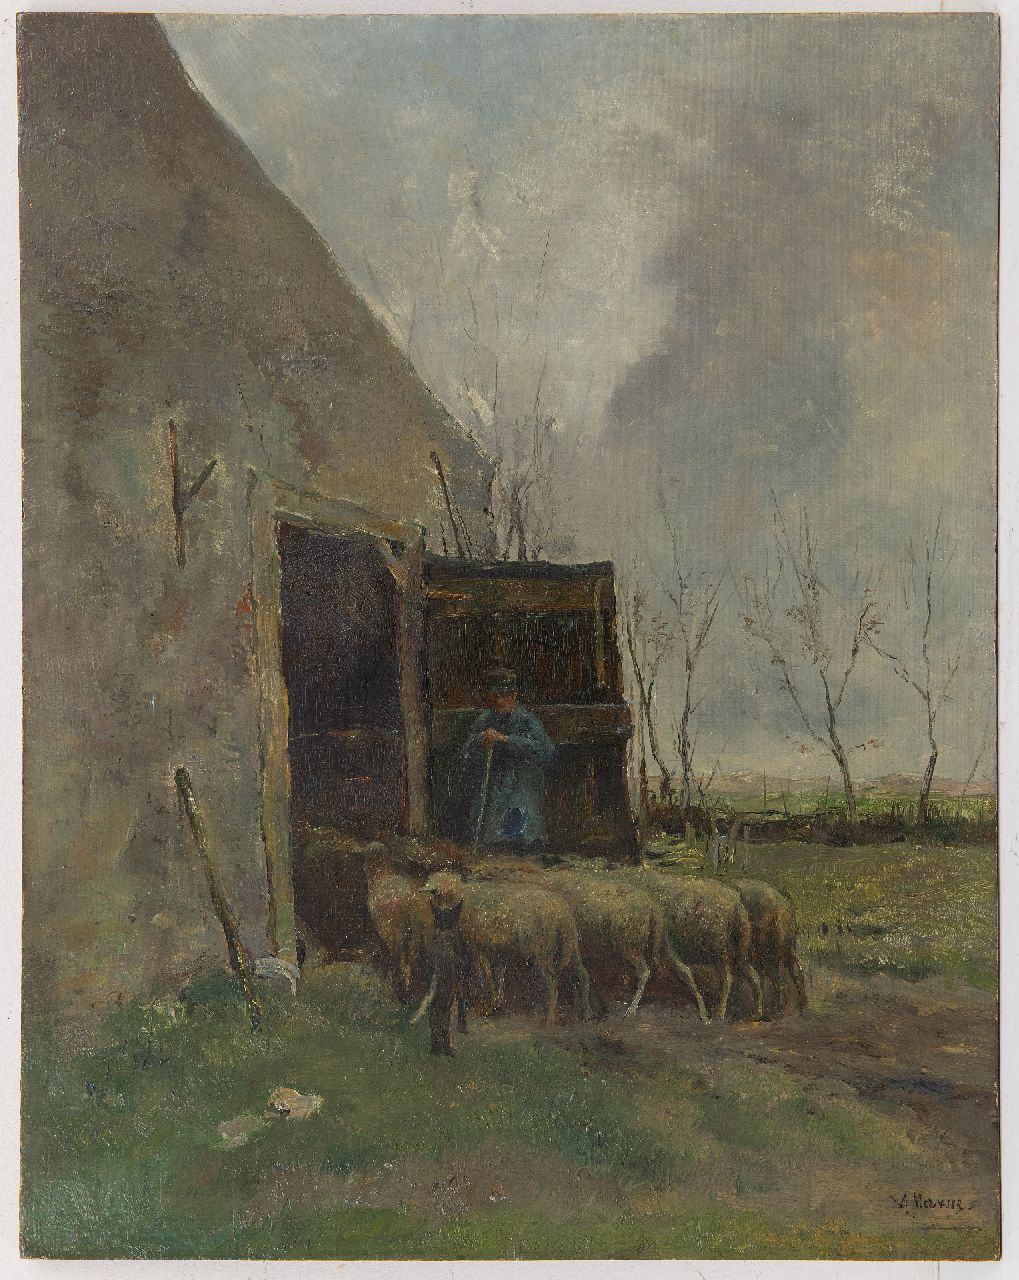 Mauve A.  | Anthonij 'Anton' Mauve | Paintings offered for sale | Sheep and shepherd at the barn, oil on panel 46.1 x 36.2 cm, signed l.r.